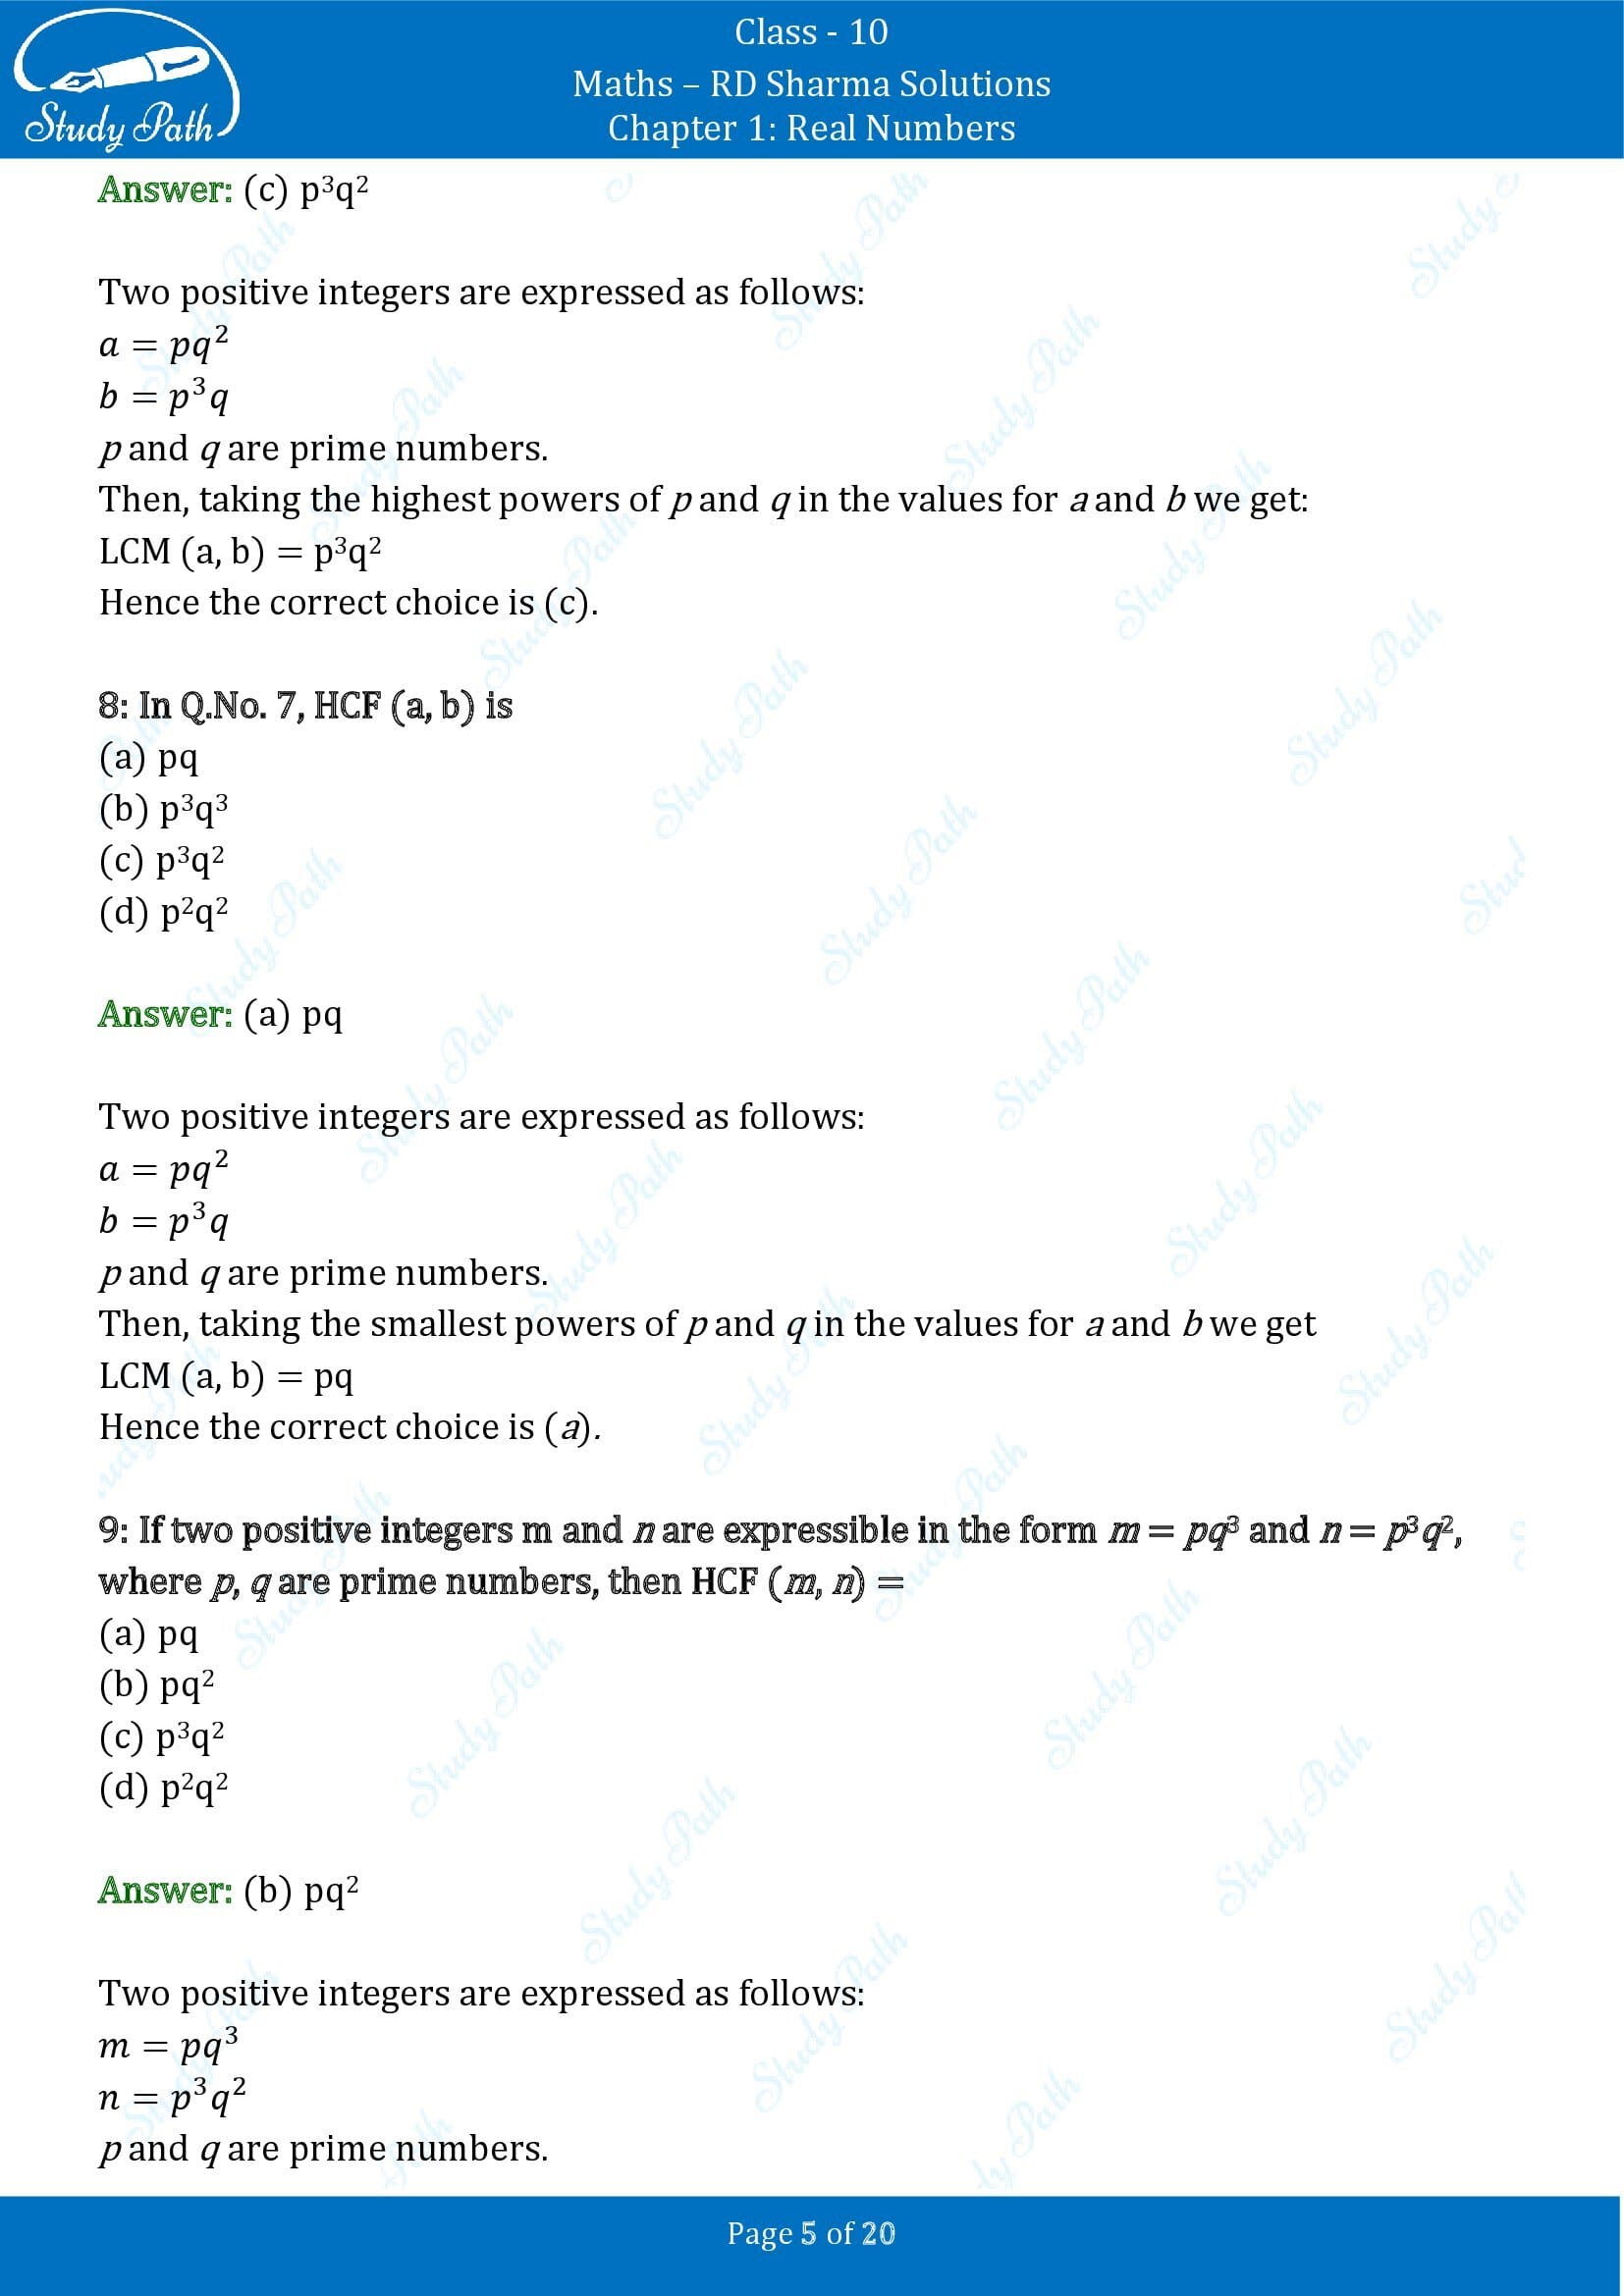 RD Sharma Solutions Class 10 Chapter 1 Real Numbers Multiple Choice Questions MCQs 00005